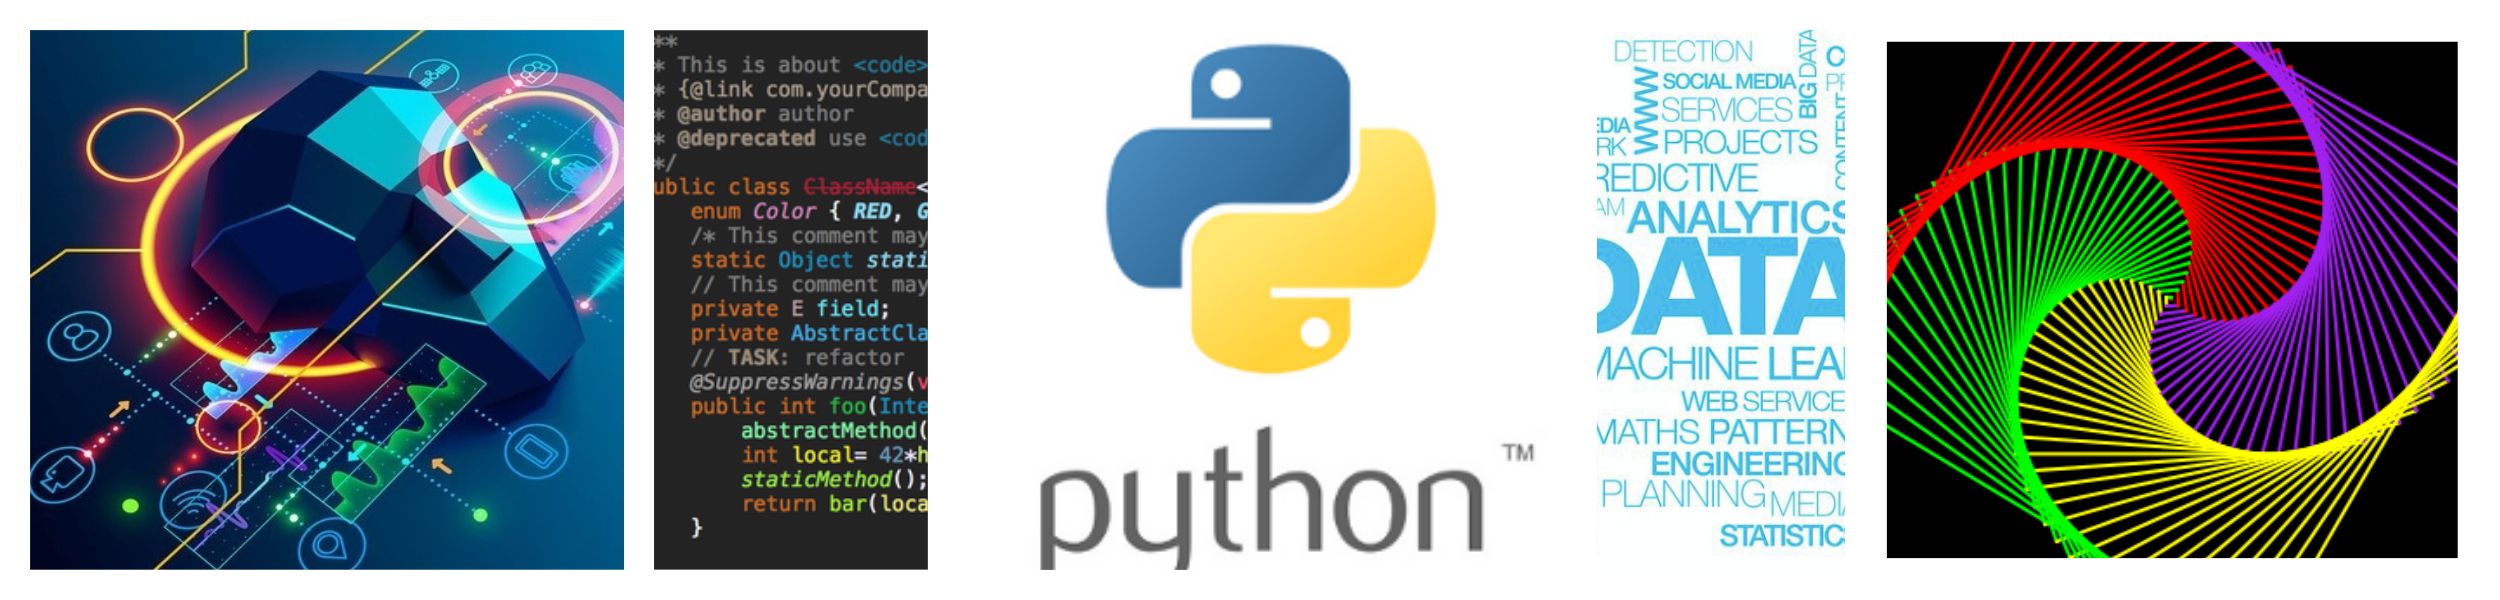 Python for AI online class from Create & Learn